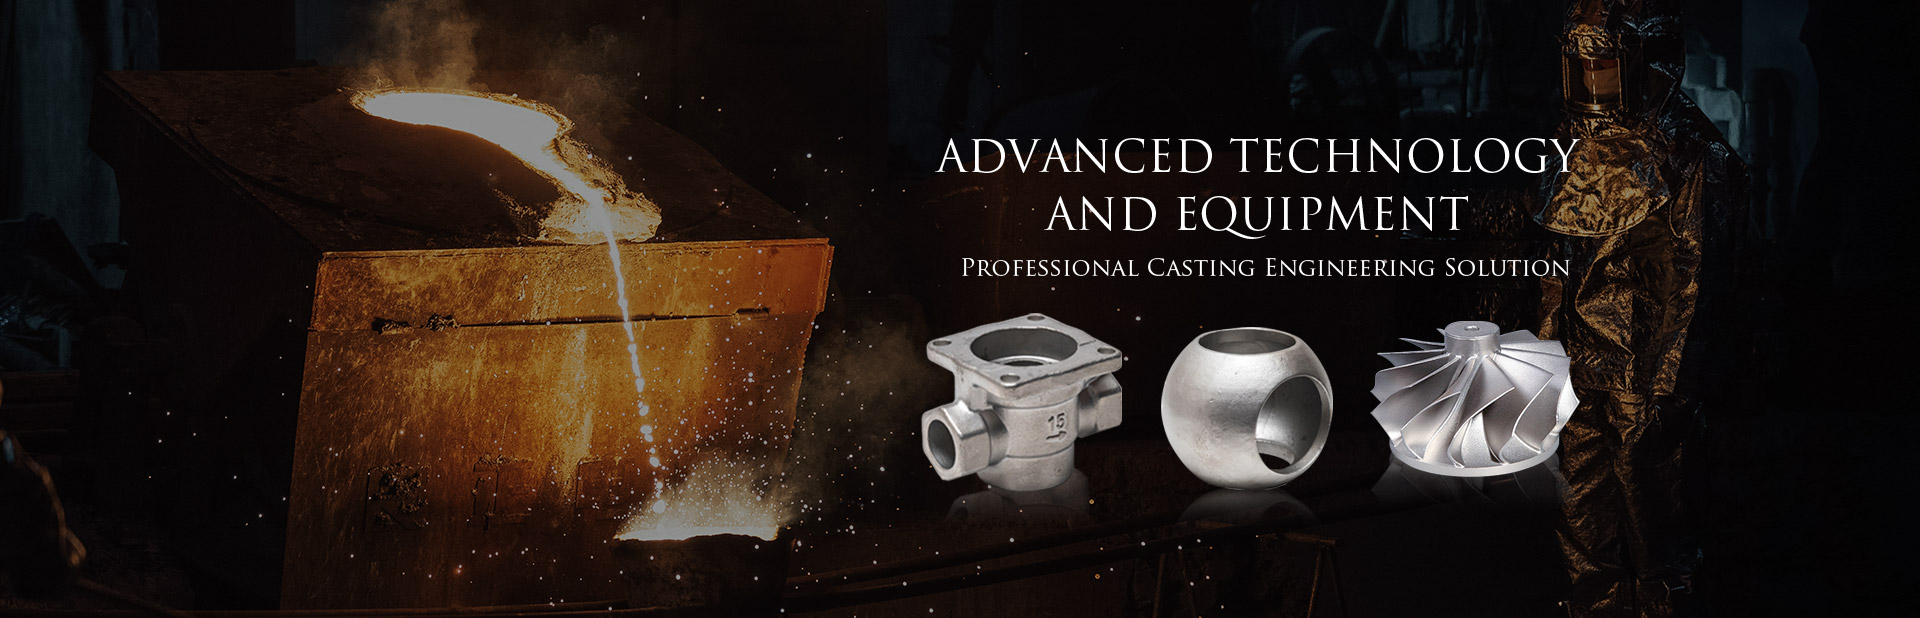 Professional casting engineering solution